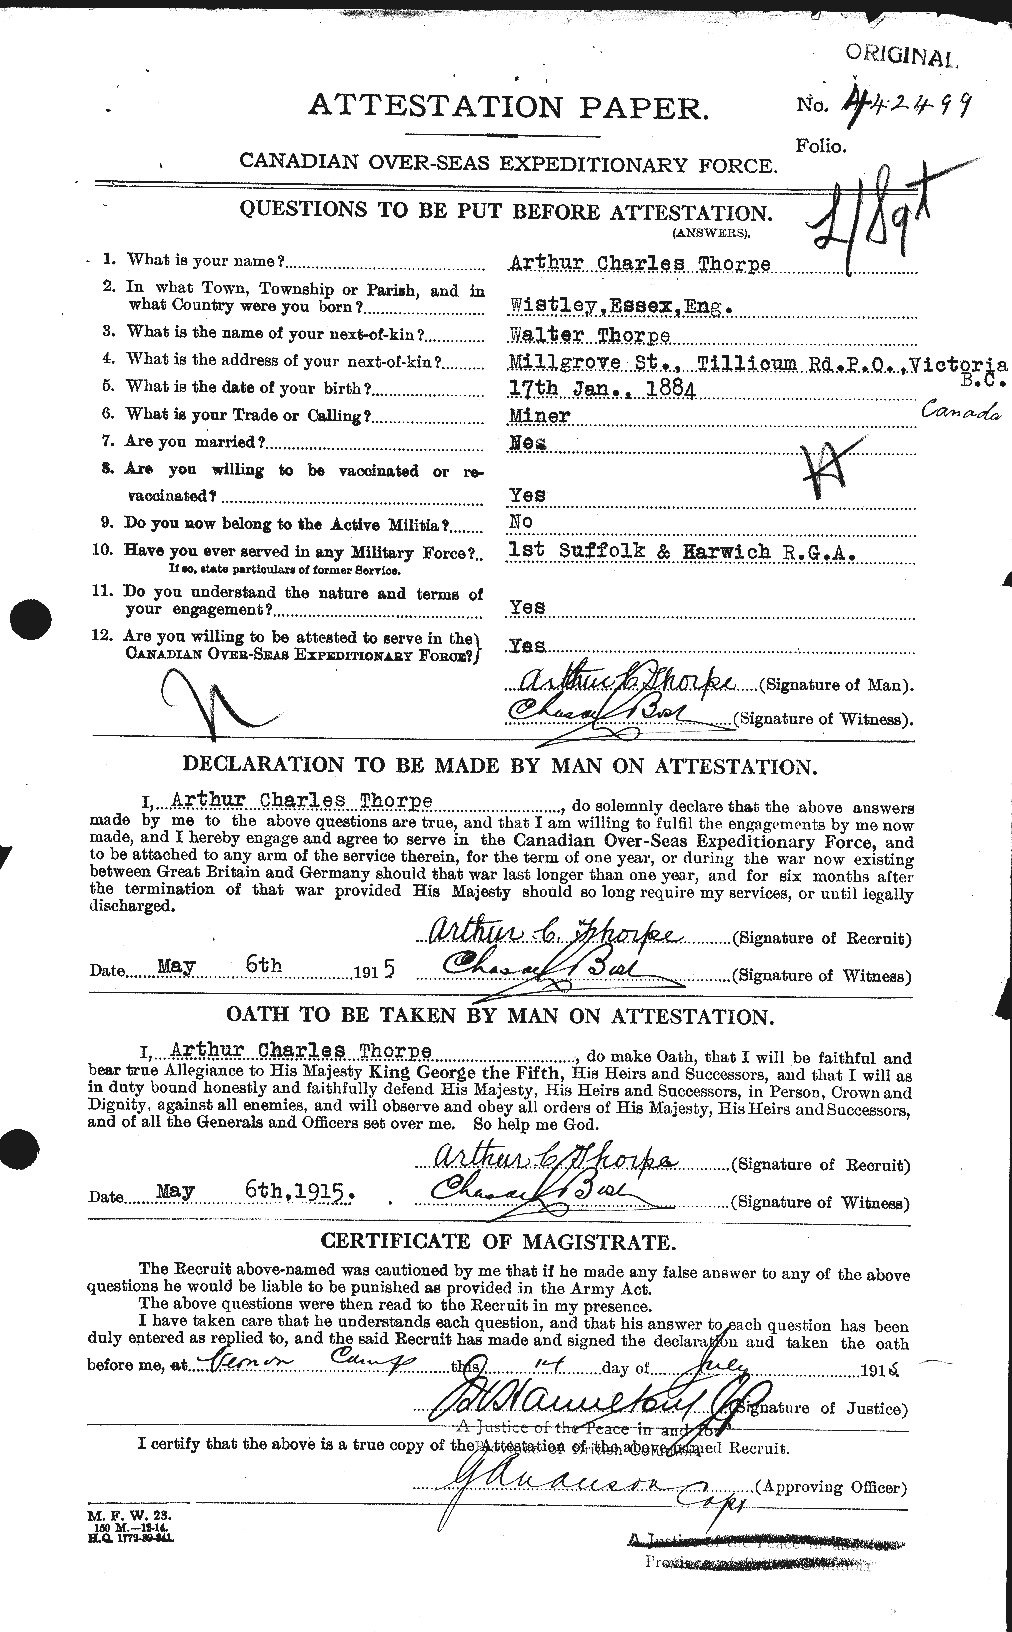 Personnel Records of the First World War - CEF 636979a